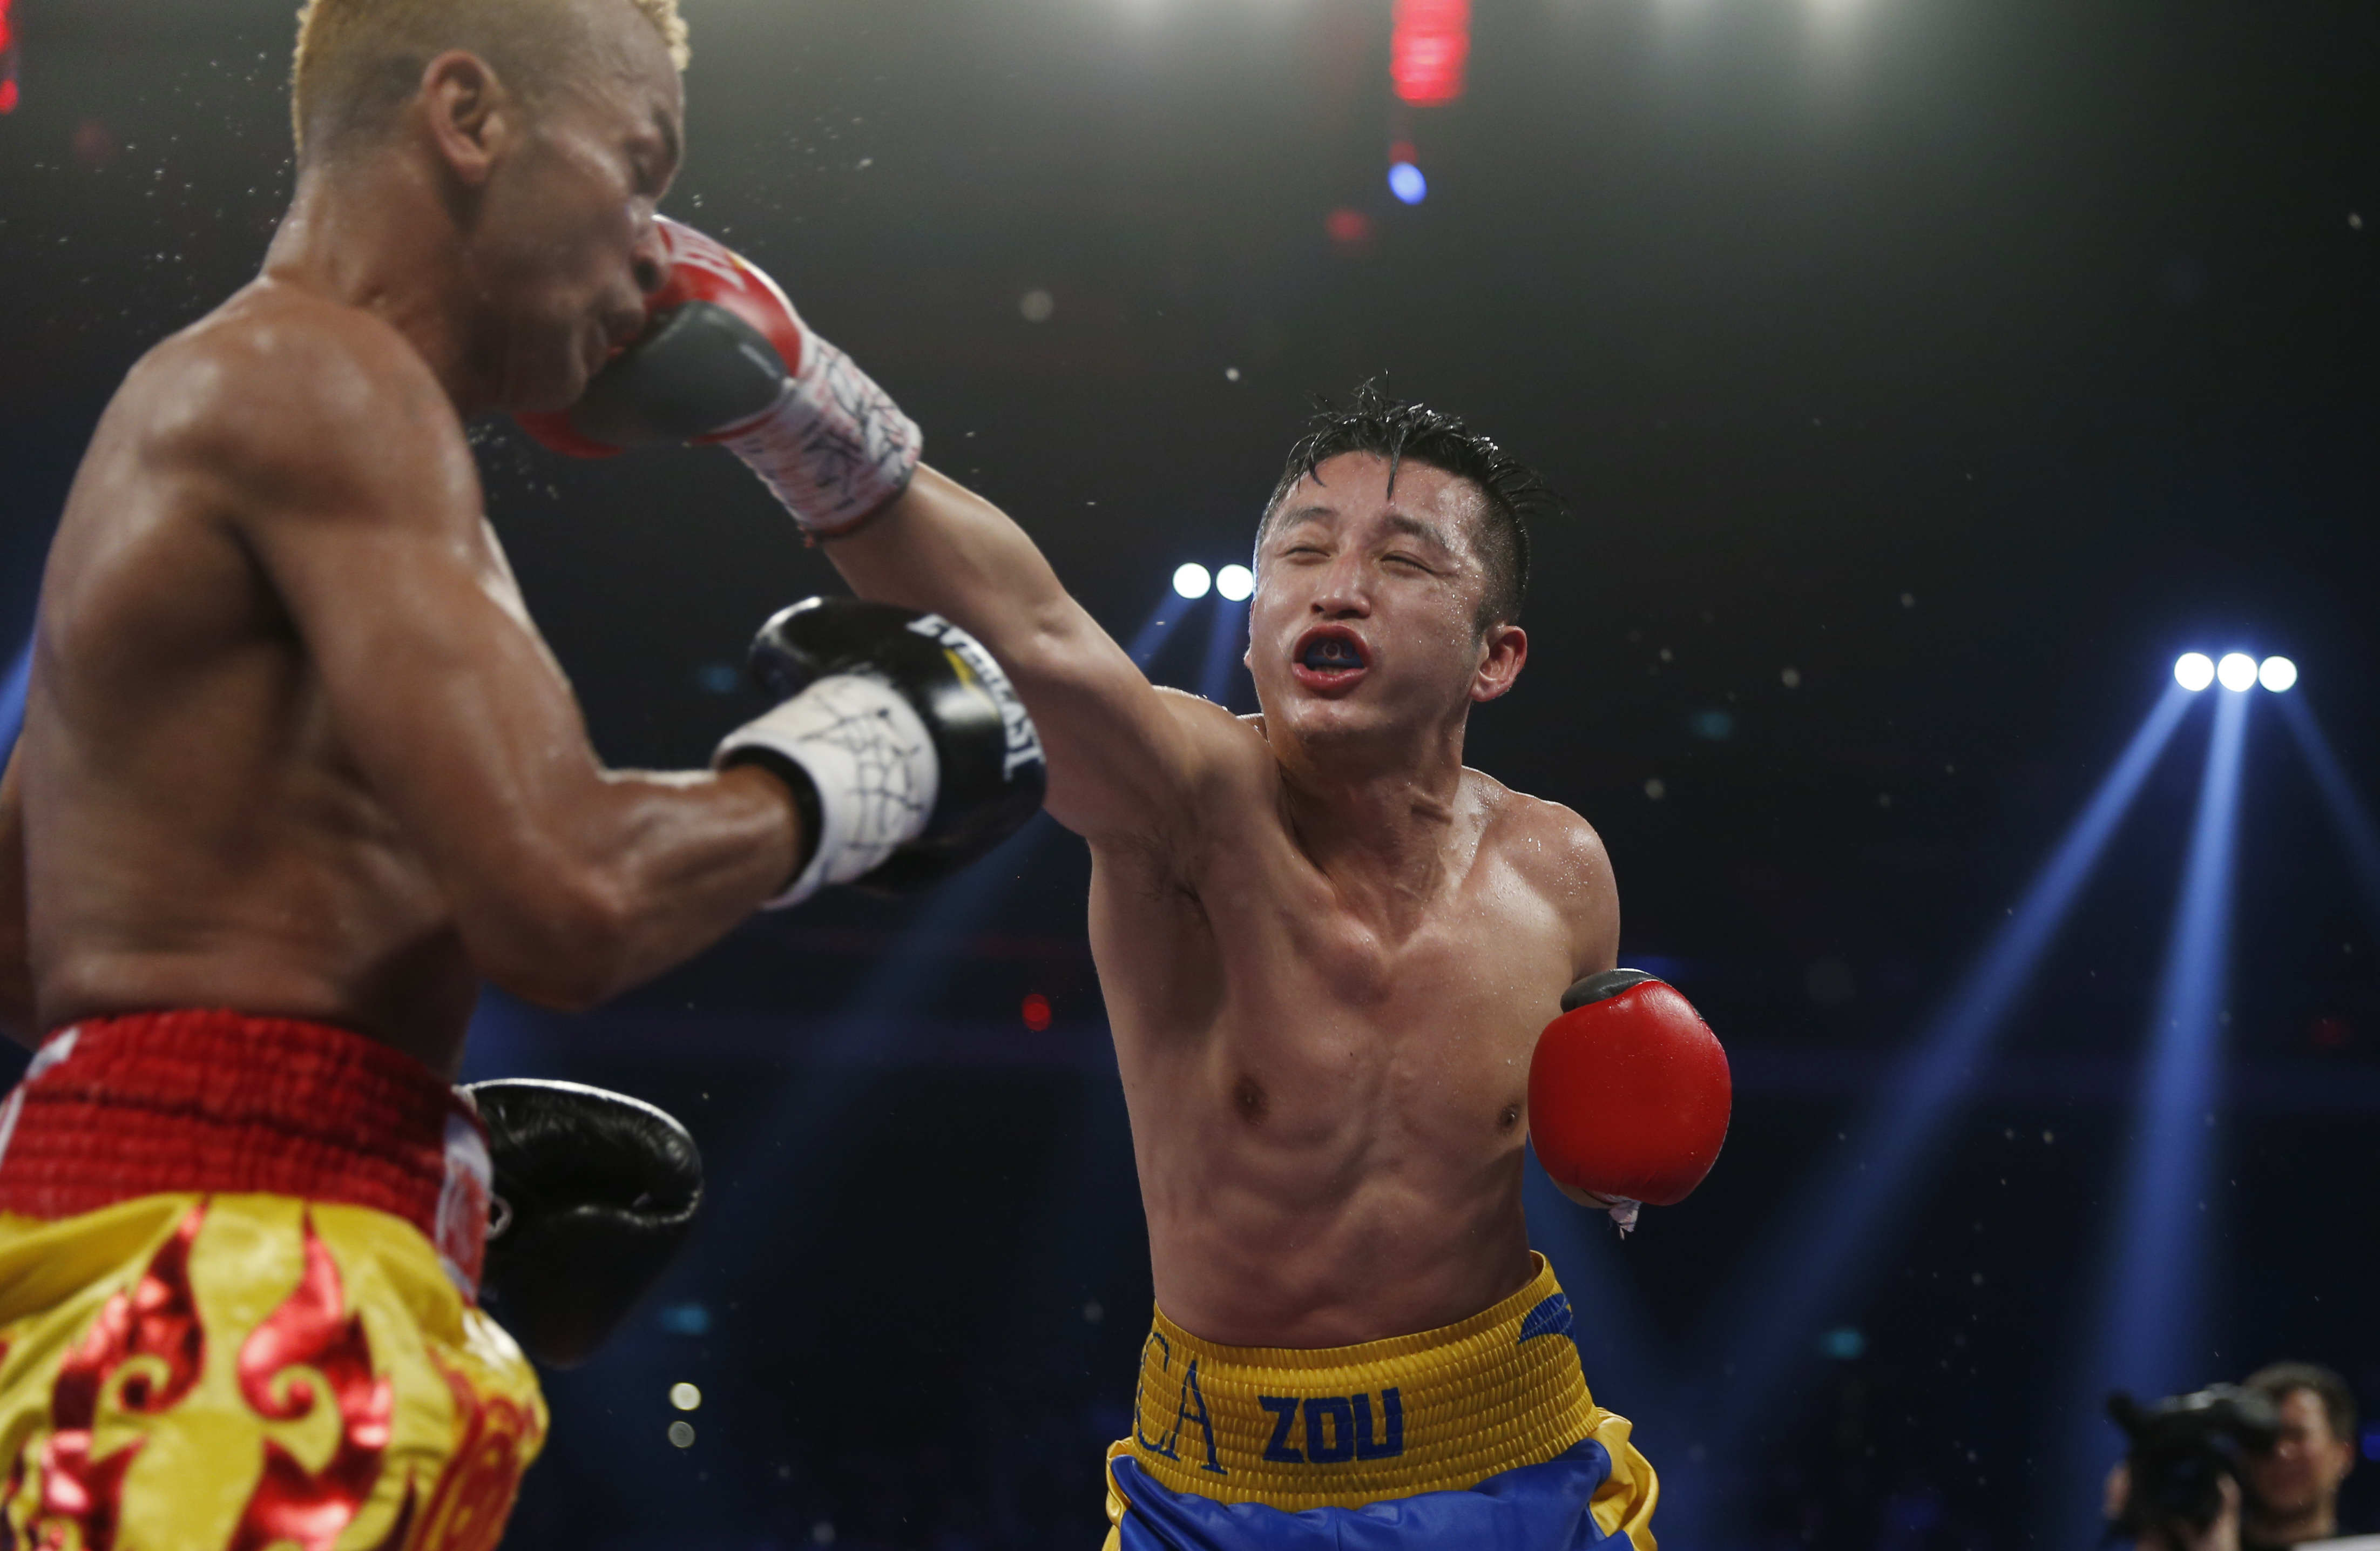 China's Zou Shiming suffered a torn rotator cuff during his world title fight against Amnat Ruenroeng in March. Photo: AP